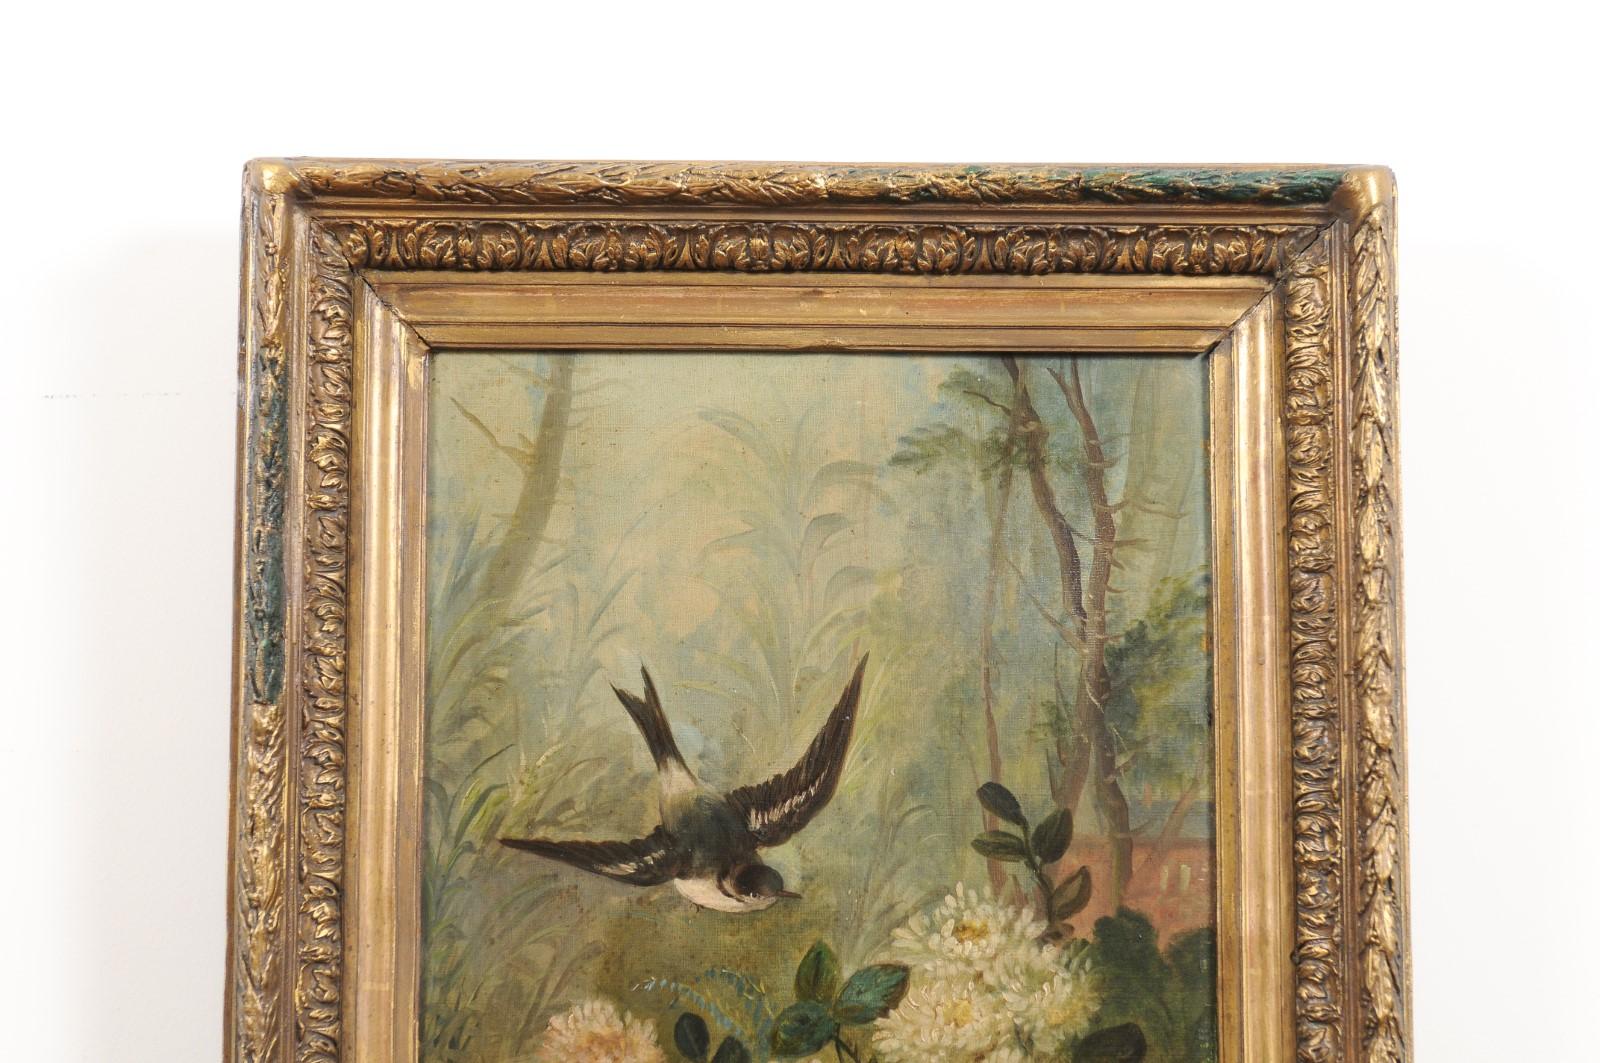 19th Century French Napoléon III 1850s Oil on Canvas Framed Painting with Bird and Roses For Sale